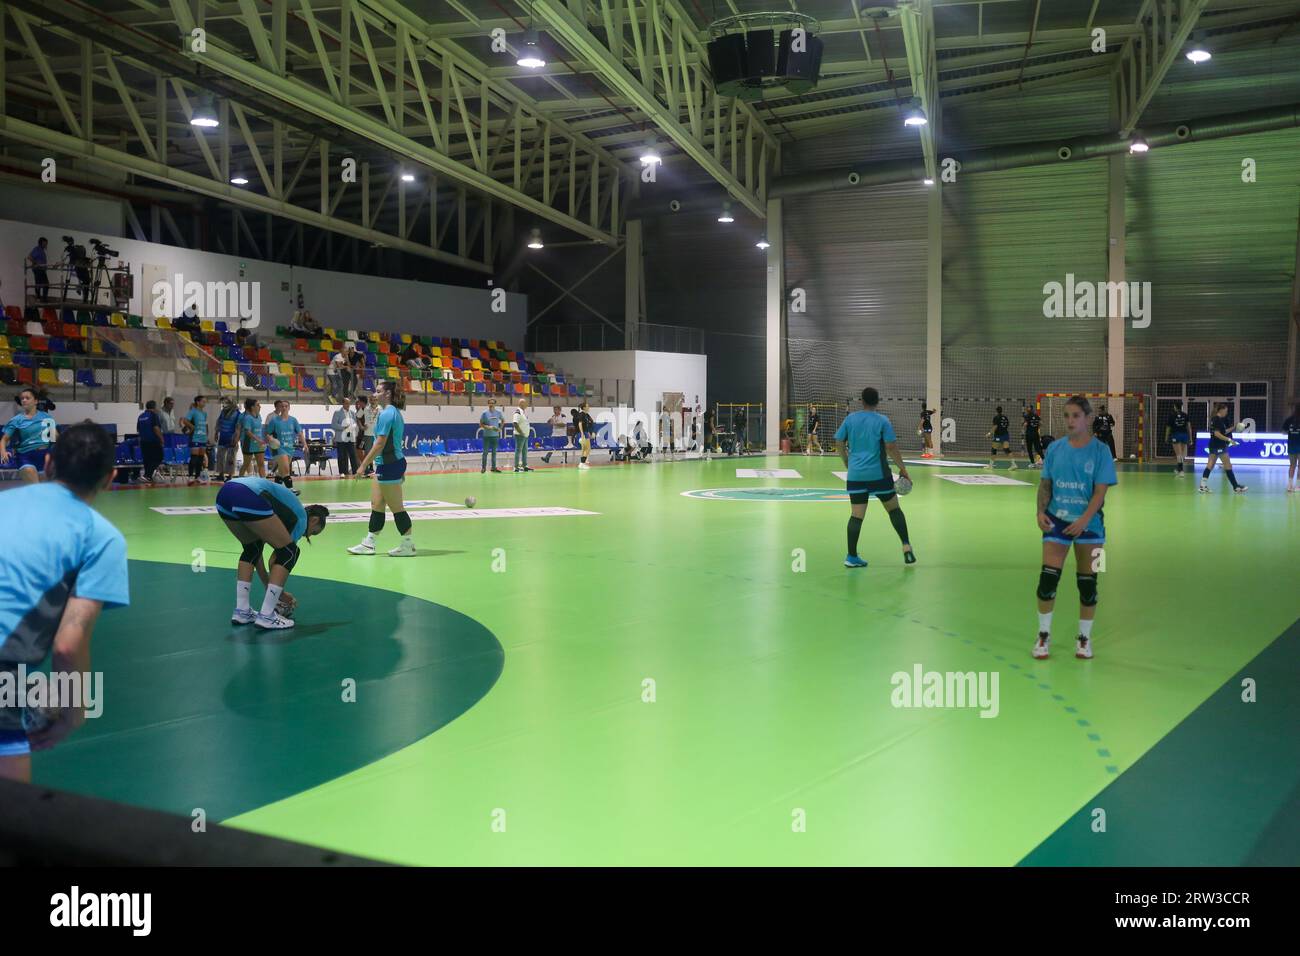 Oviedo, Spain, September 16, 2023: Players of both teams warming up during the 3rd Matchday of the Liga Guerreras Iberdrola 2023-24 between Lobas Global Atac Oviedo and Elda Prestigio, on September 16, 2023, at the Florida Municipal Sports Center Arena, in Oviedo, Spain. Credit: Alberto Brevers / Alamy Live News Stock Photo